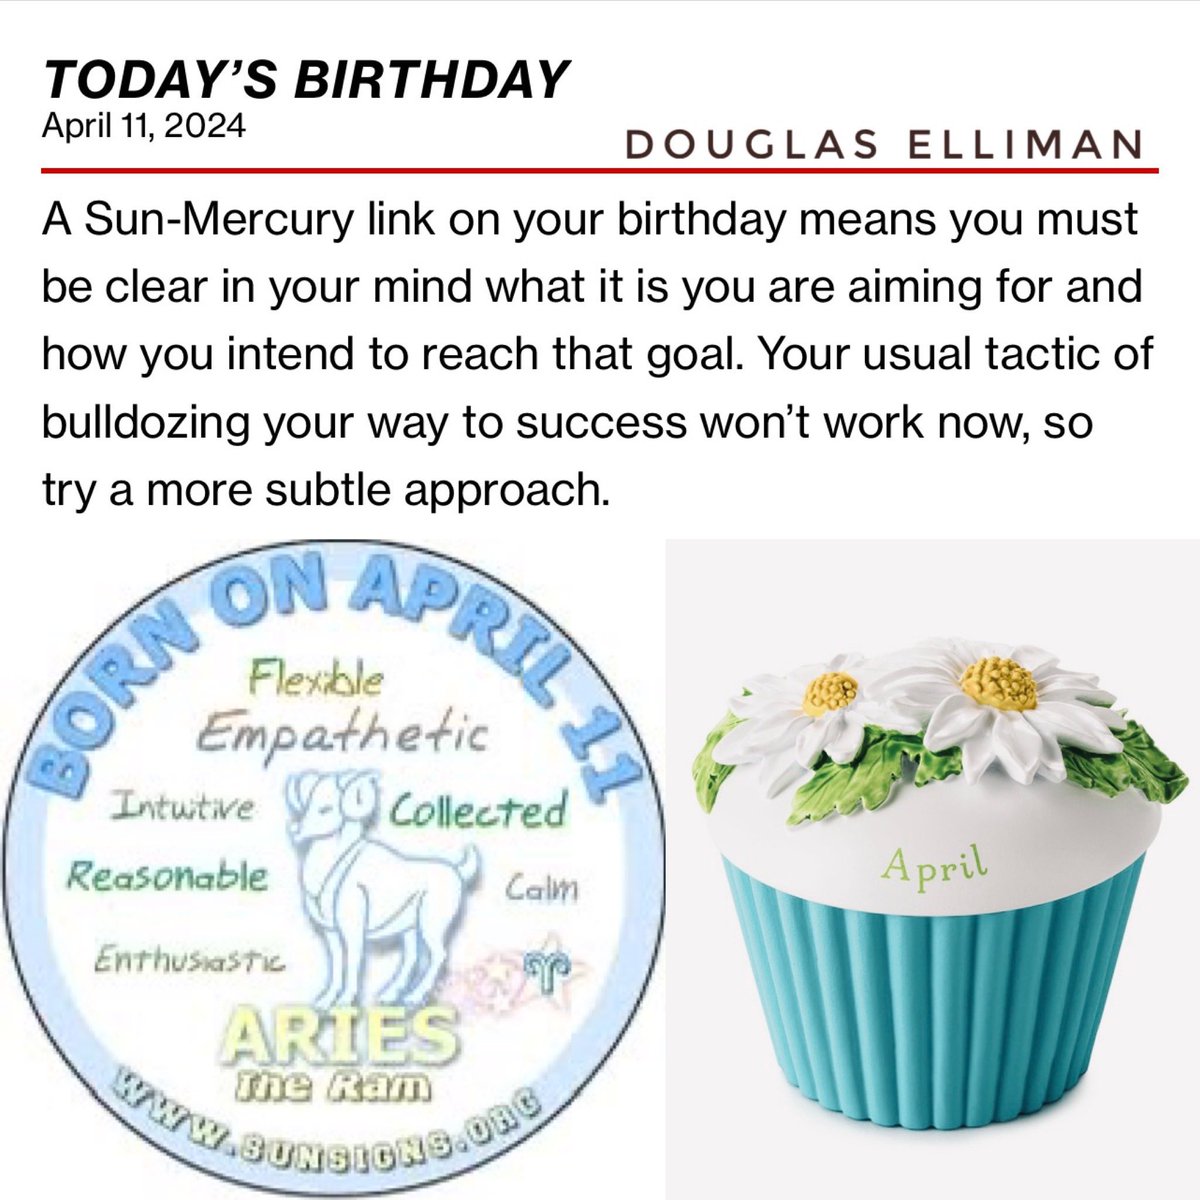 For everyone celebrating a #Birthday today, #April11th  check out your Horoscope & enjoy your special day! ♈️🐏 🎉🎈🎂🎊🎁🥂🍾👏🏻👏🏻👏🏻👏🏻👏🏻#happybirthday #Aries 
#Horoscope #happybirthdaytoyou #HappySpring #HappyApril
@DouglasElliman 

facebook.com/share/r/MSJ2HQ…